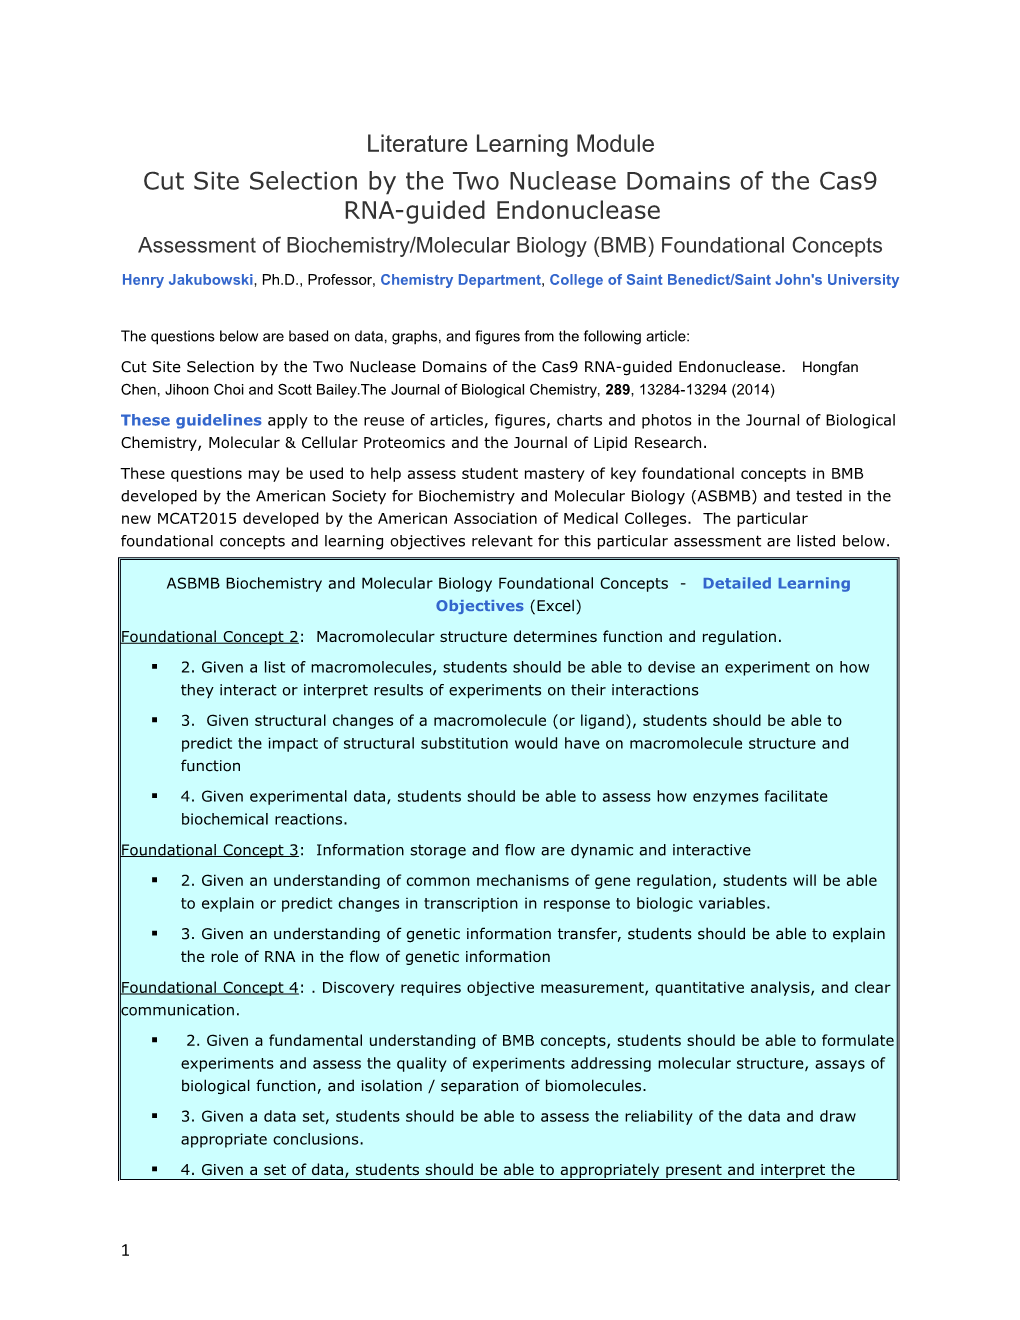 Cut Site Selection by the Two Nuclease Domains of the Cas9 RNA-Guided Endonuclease